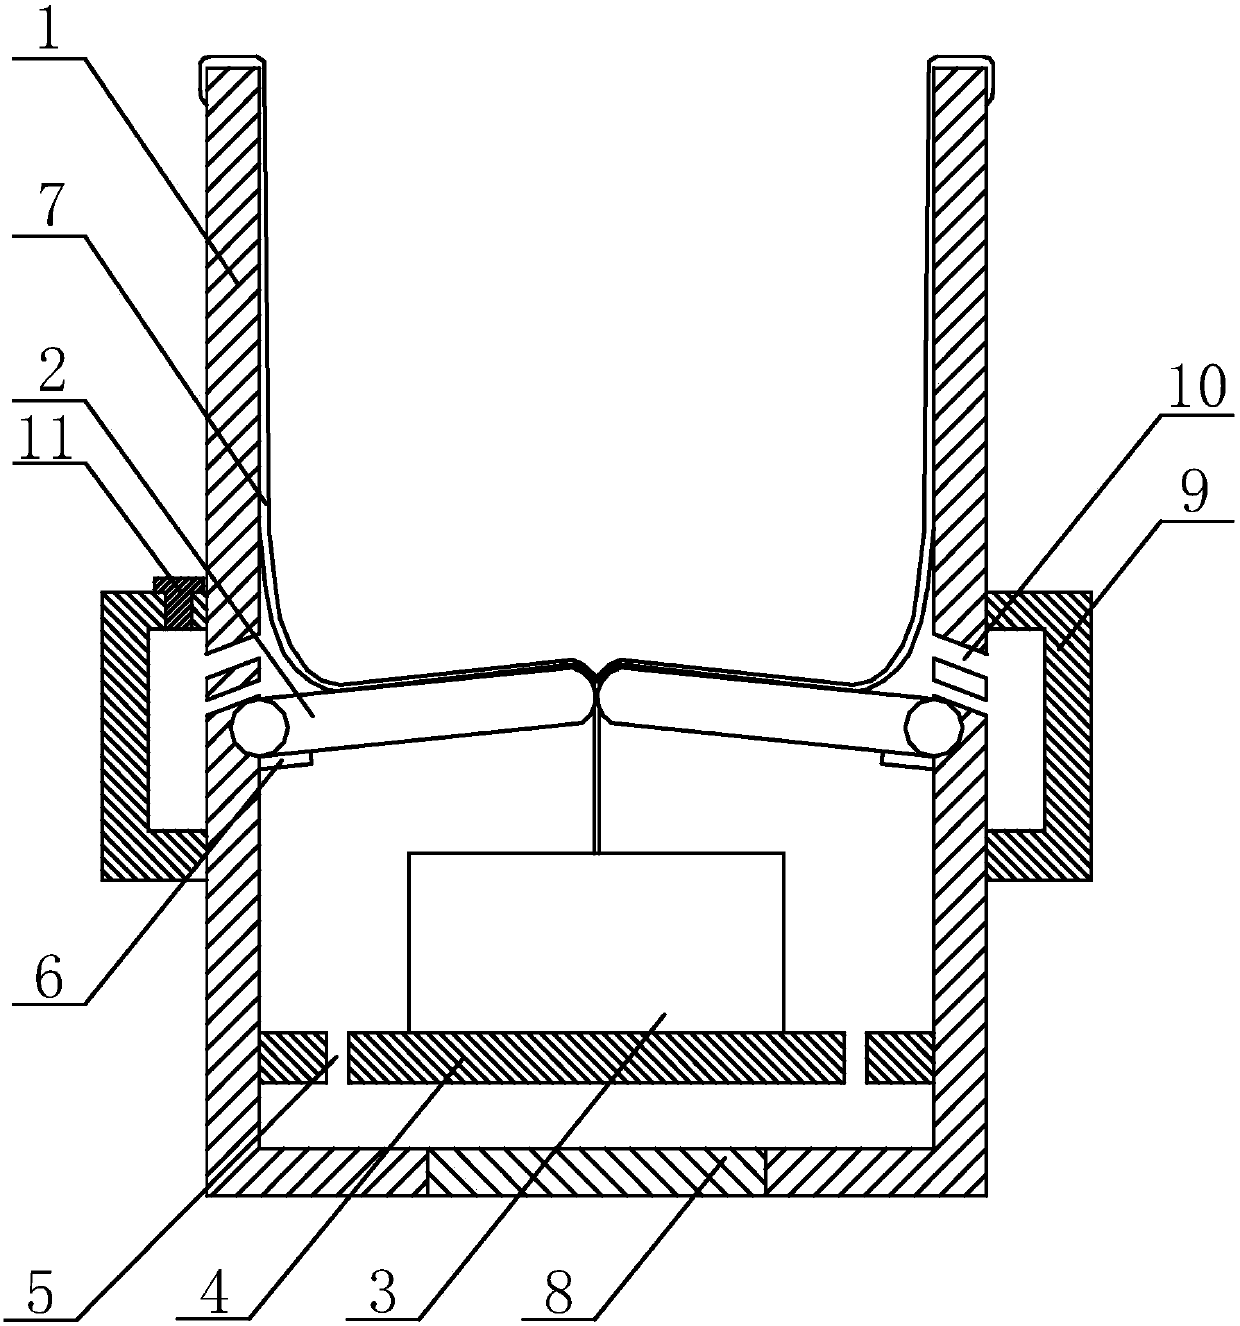 Using method of waste recycling device